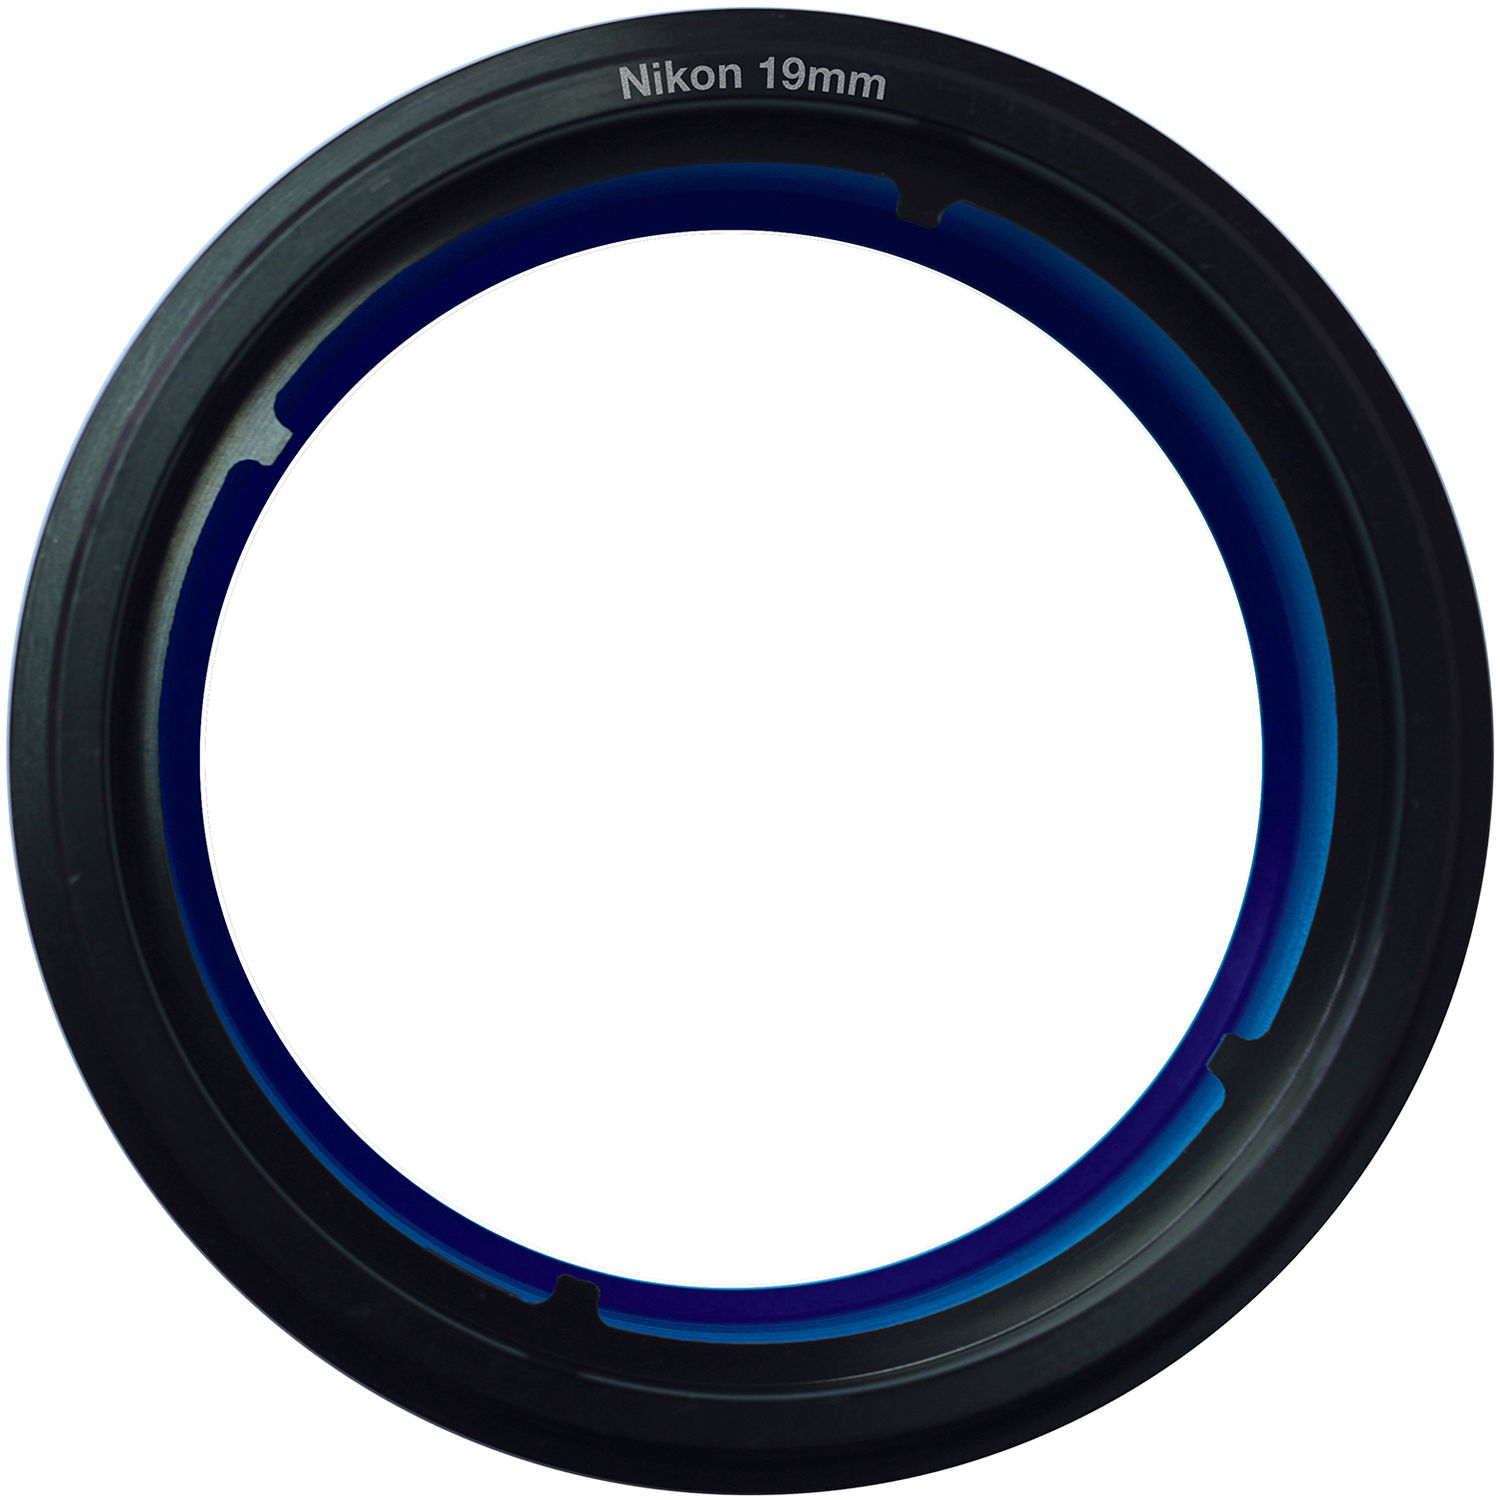 Lee Filters 100mm Adapter Ring For Nikon Pc 19mm F 4e Ed Arn19pc